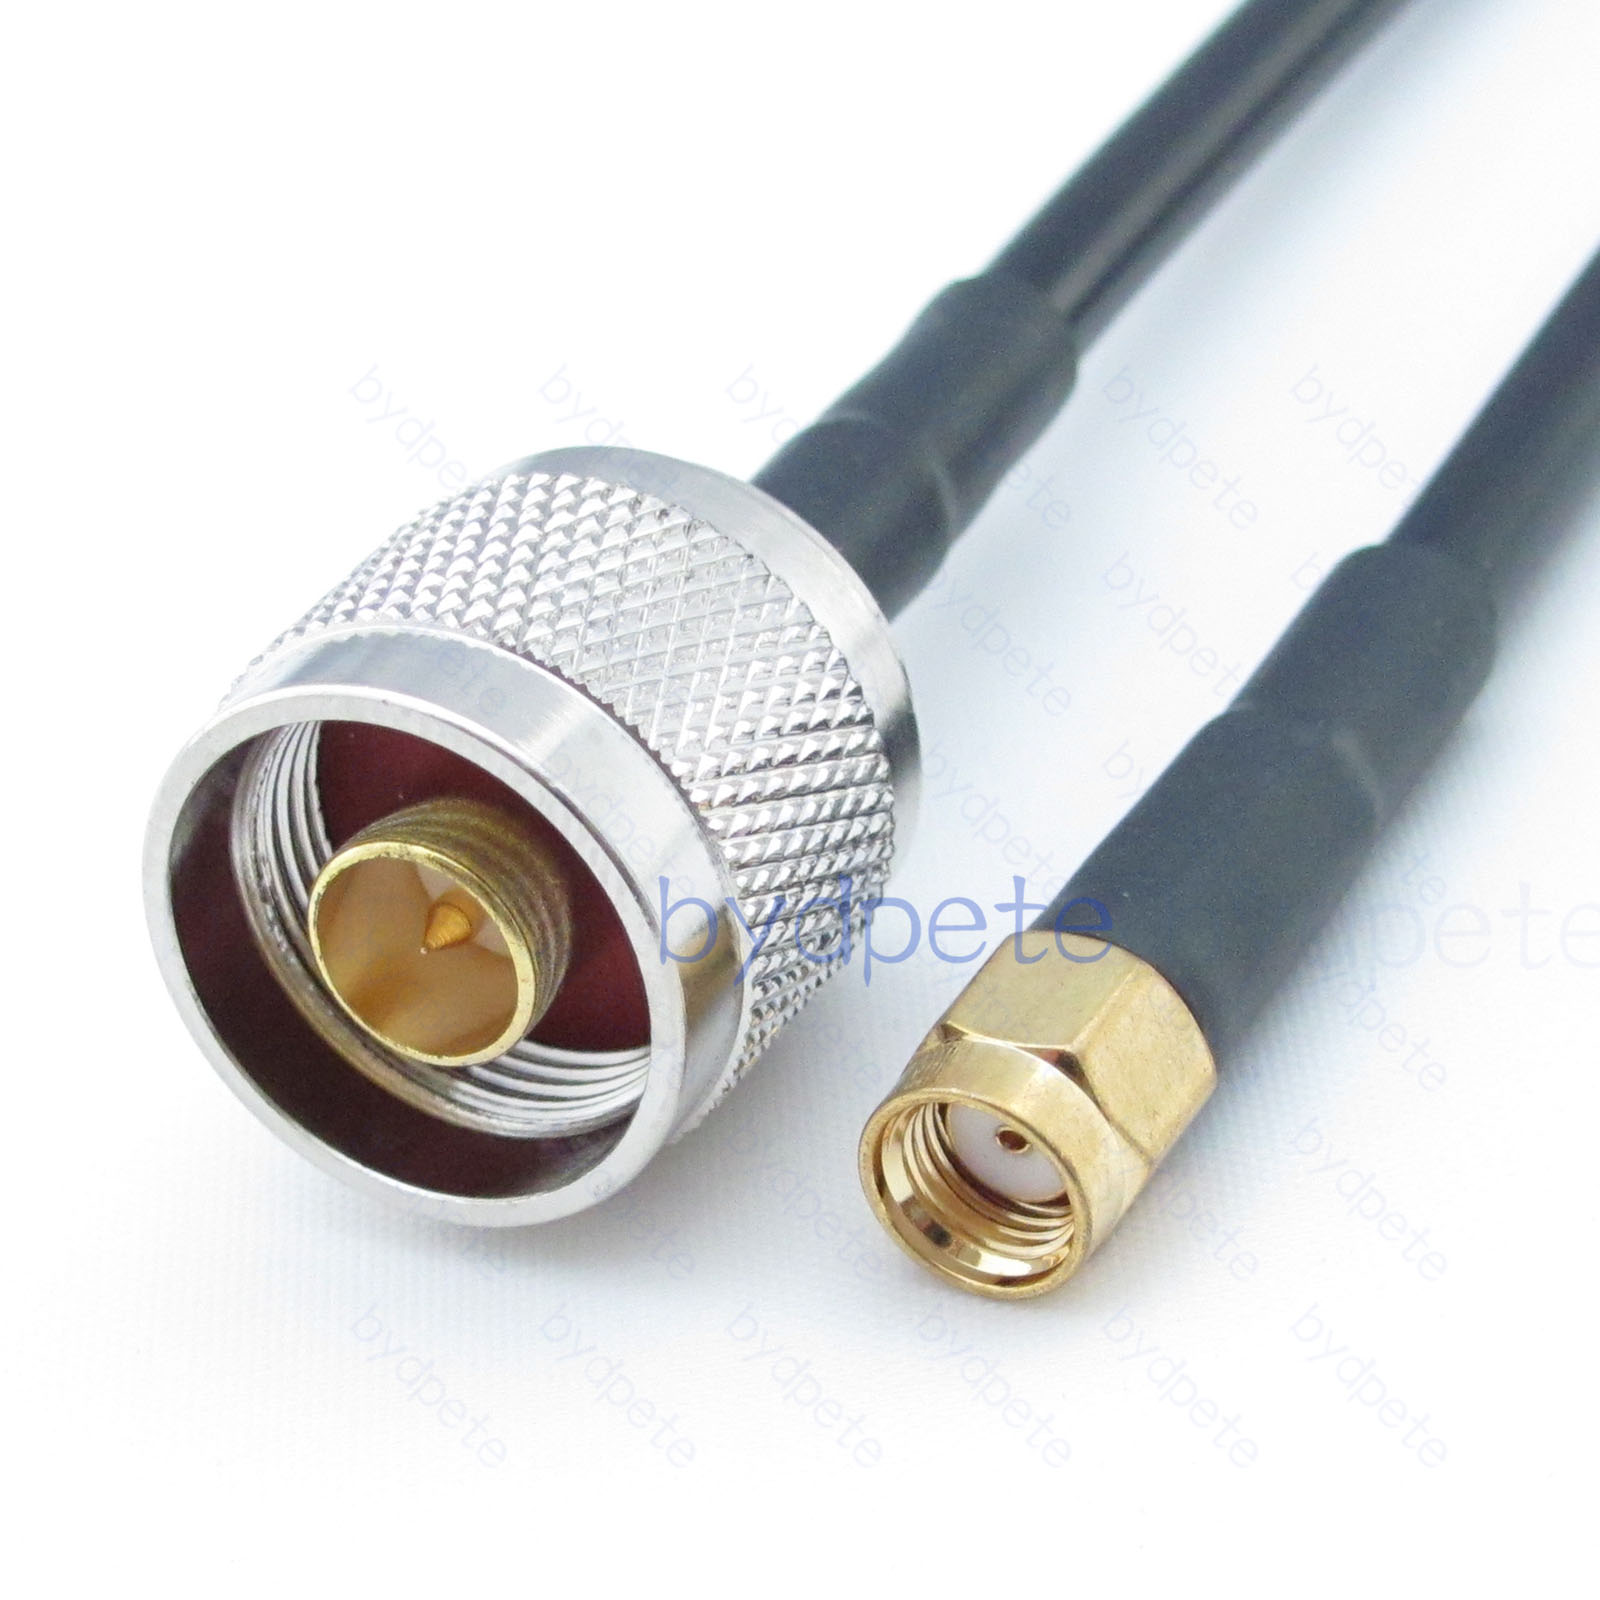 N-Type male plug to RP-SMA male RG58 Coax Coaxial Cable 50ohm Low Loss RF bydpete BYDC021N58